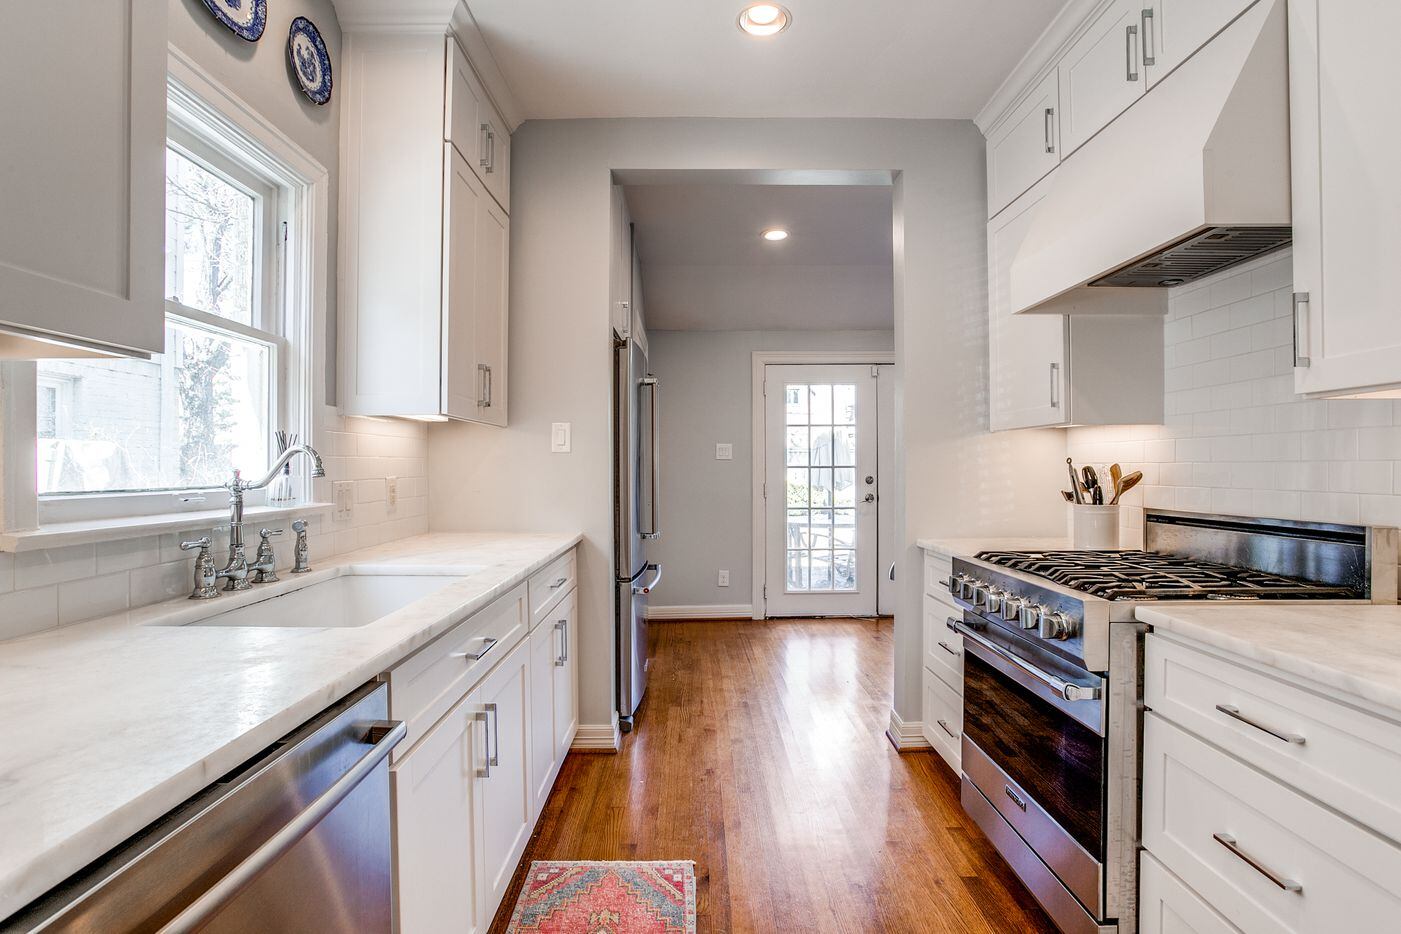 Find marble countertops and stainless-steel appliances in the renovated kitchen.